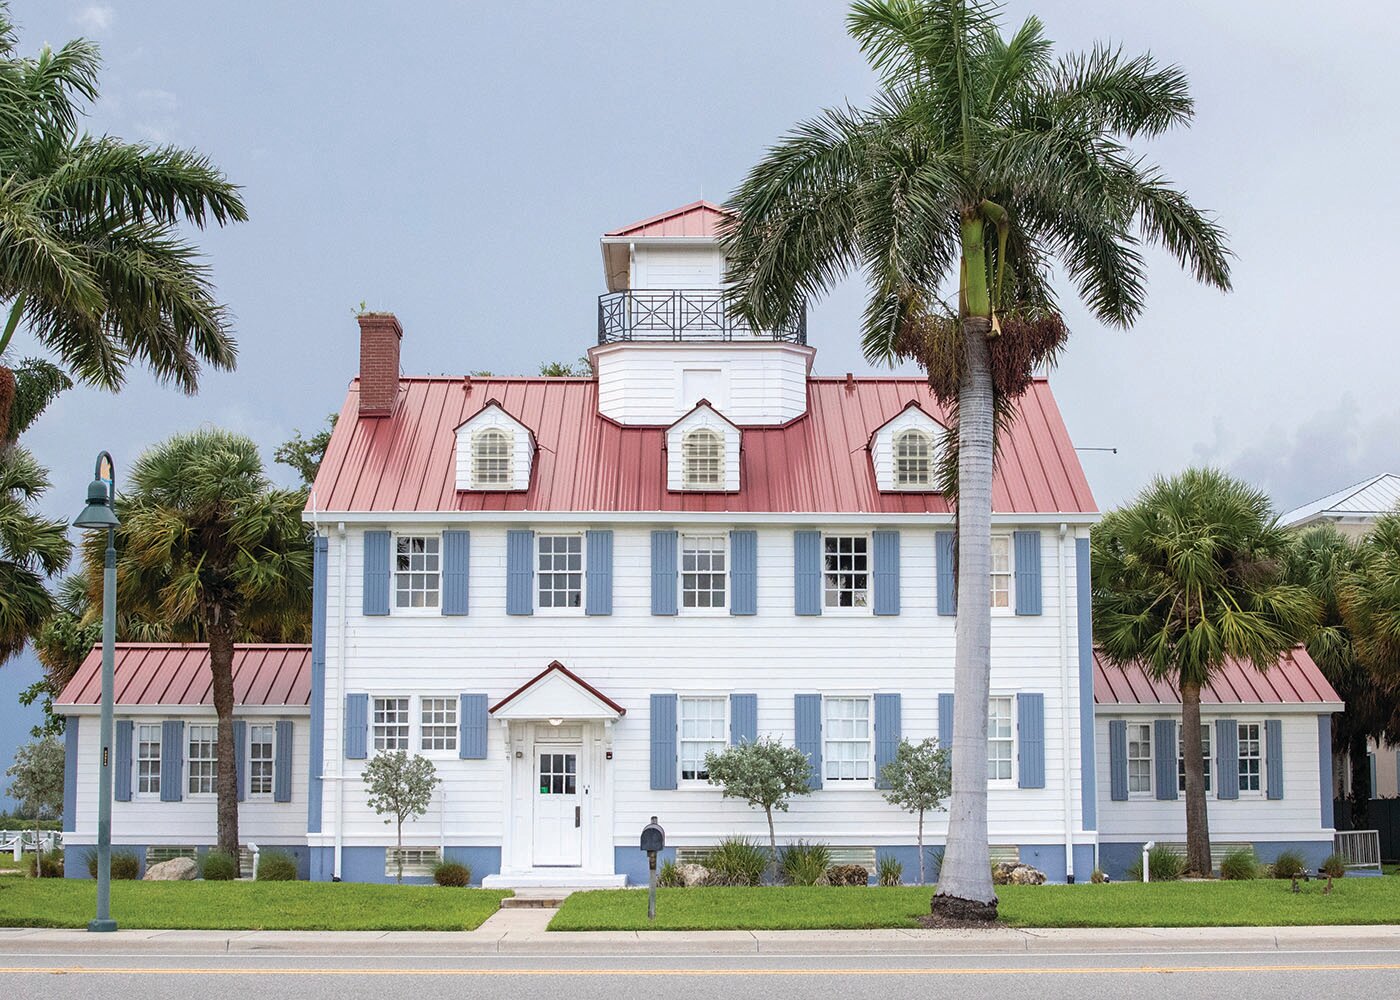 This photo is of the historic IRSC Coast Guard House located at 1420 Seaway Trail in Fort Pierce.